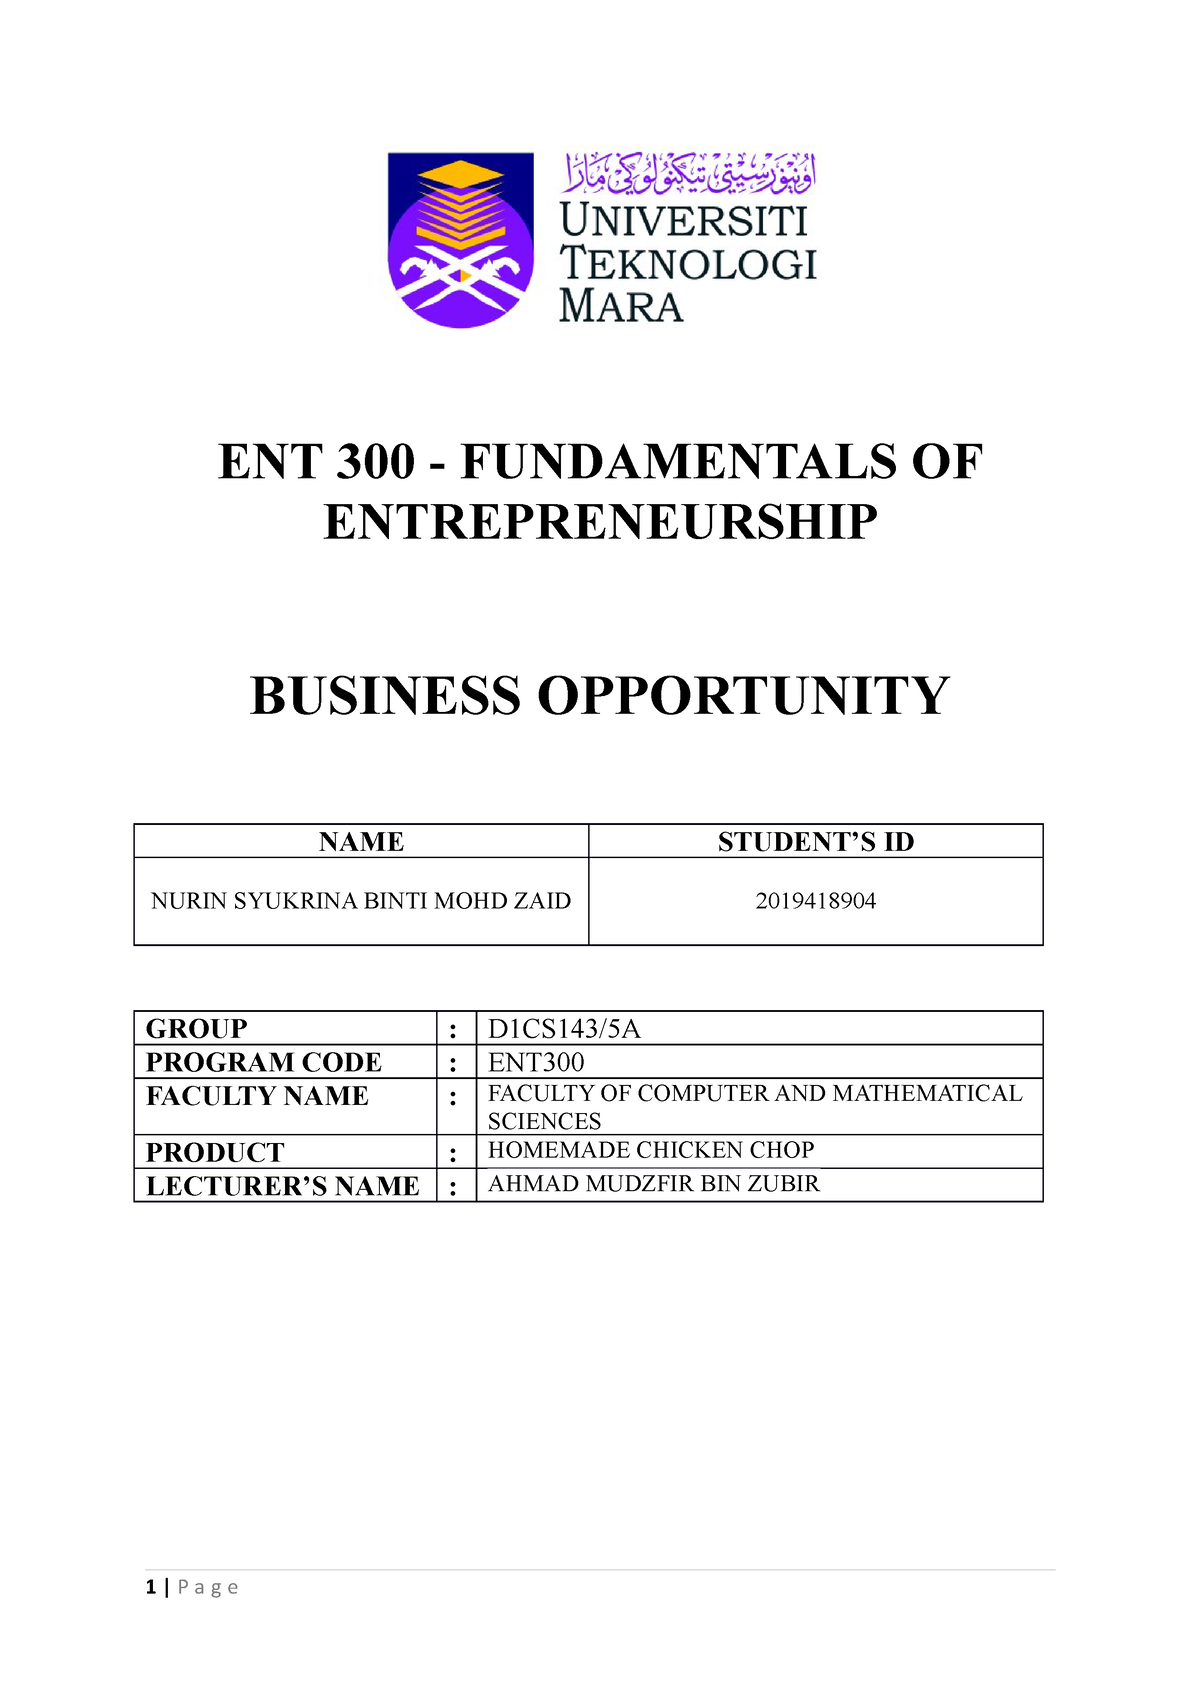 assignment ent300 business opportunity